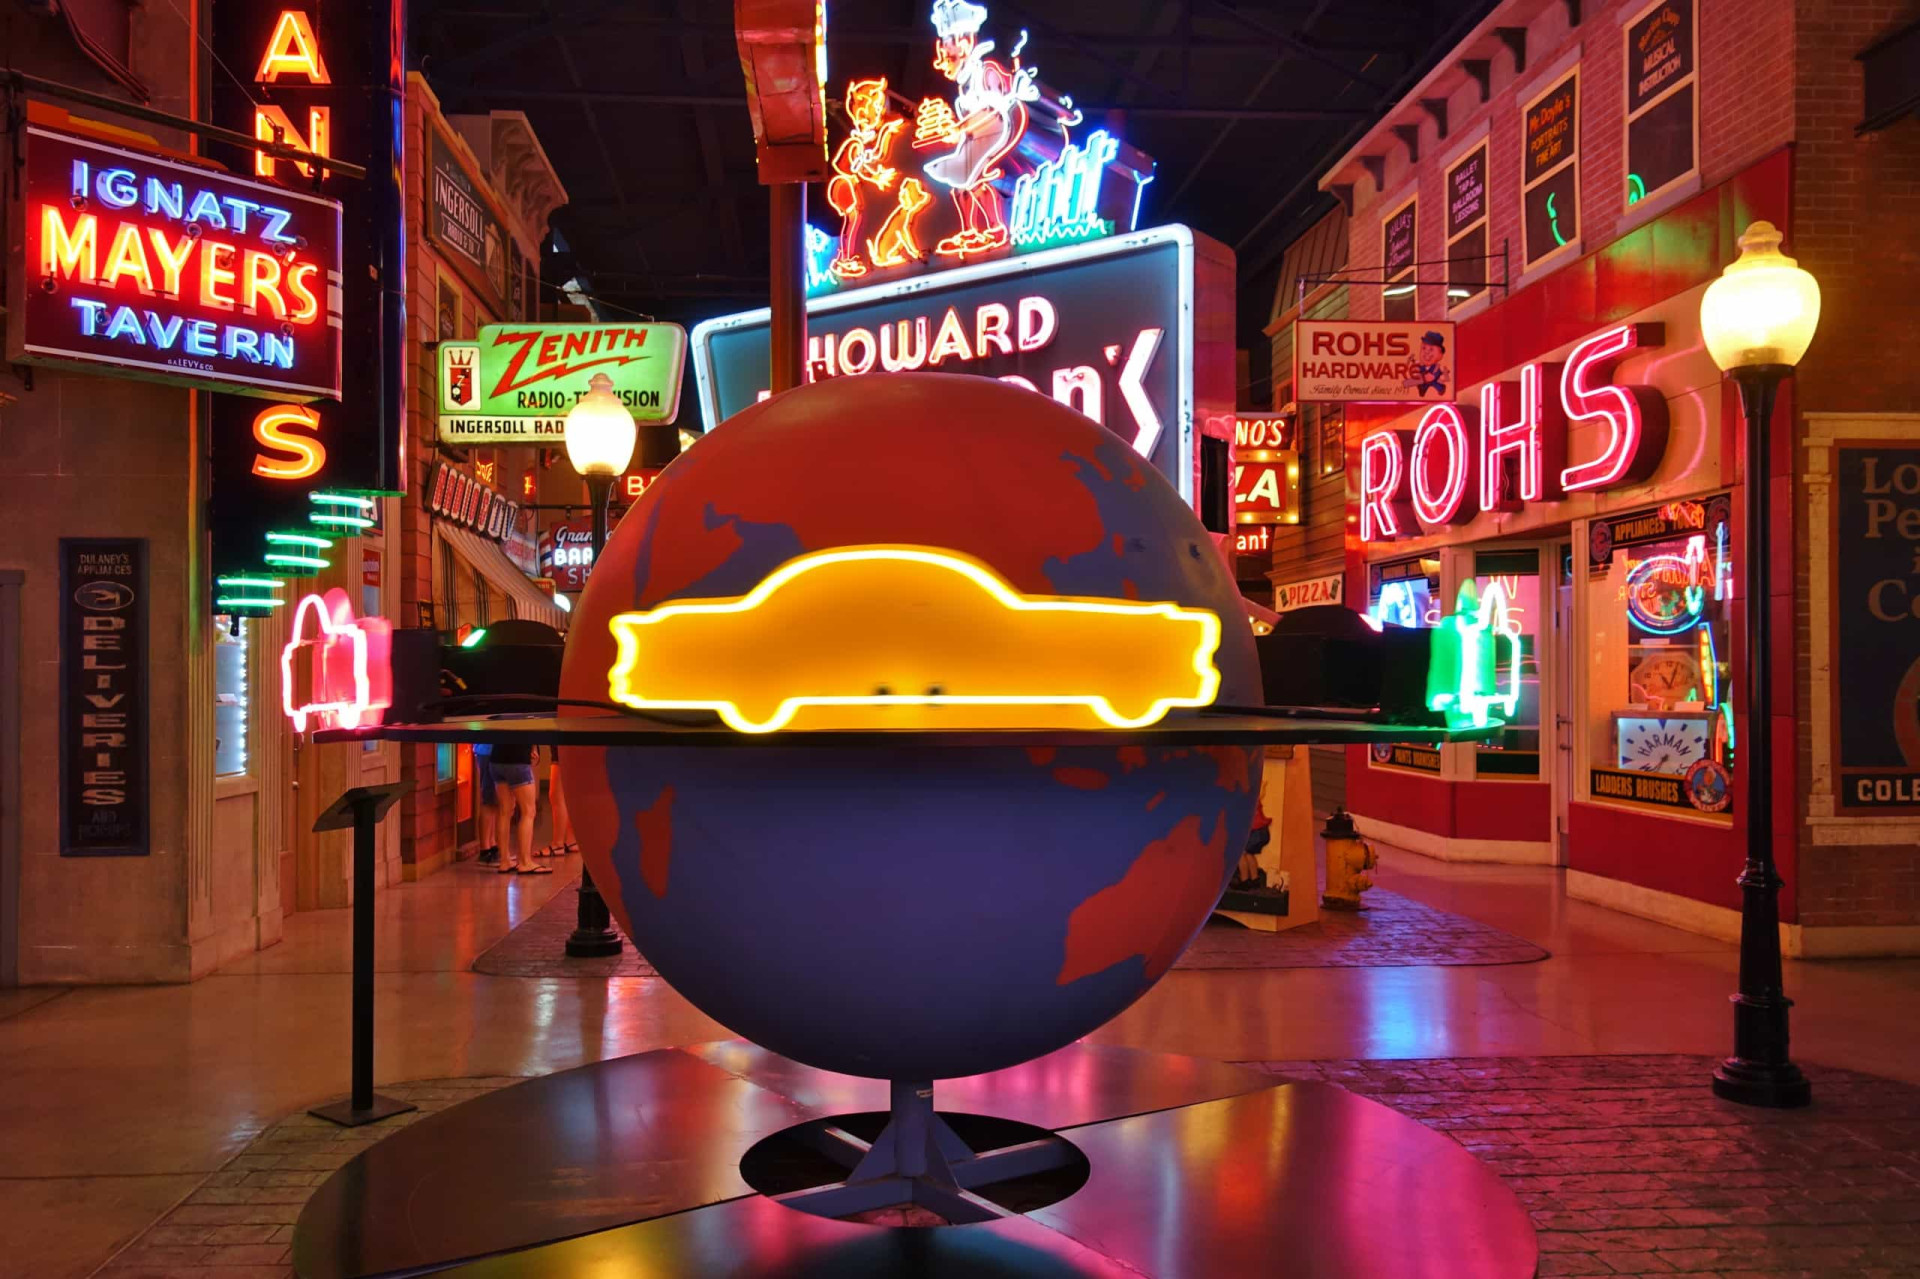 <p>Dedicated to the art and history of signs and signmaking, the American Sign Museum is all blinking neon and floodlit halogen.</p><p><a href="https://www.msn.com/en-us/community/channel/vid-7xx8mnucu55yw63we9va2gwr7uihbxwc68fxqp25x6tg4ftibpra?cvid=94631541bc0f4f89bfd59158d696ad7e">Follow us and access great exclusive content every day</a></p>